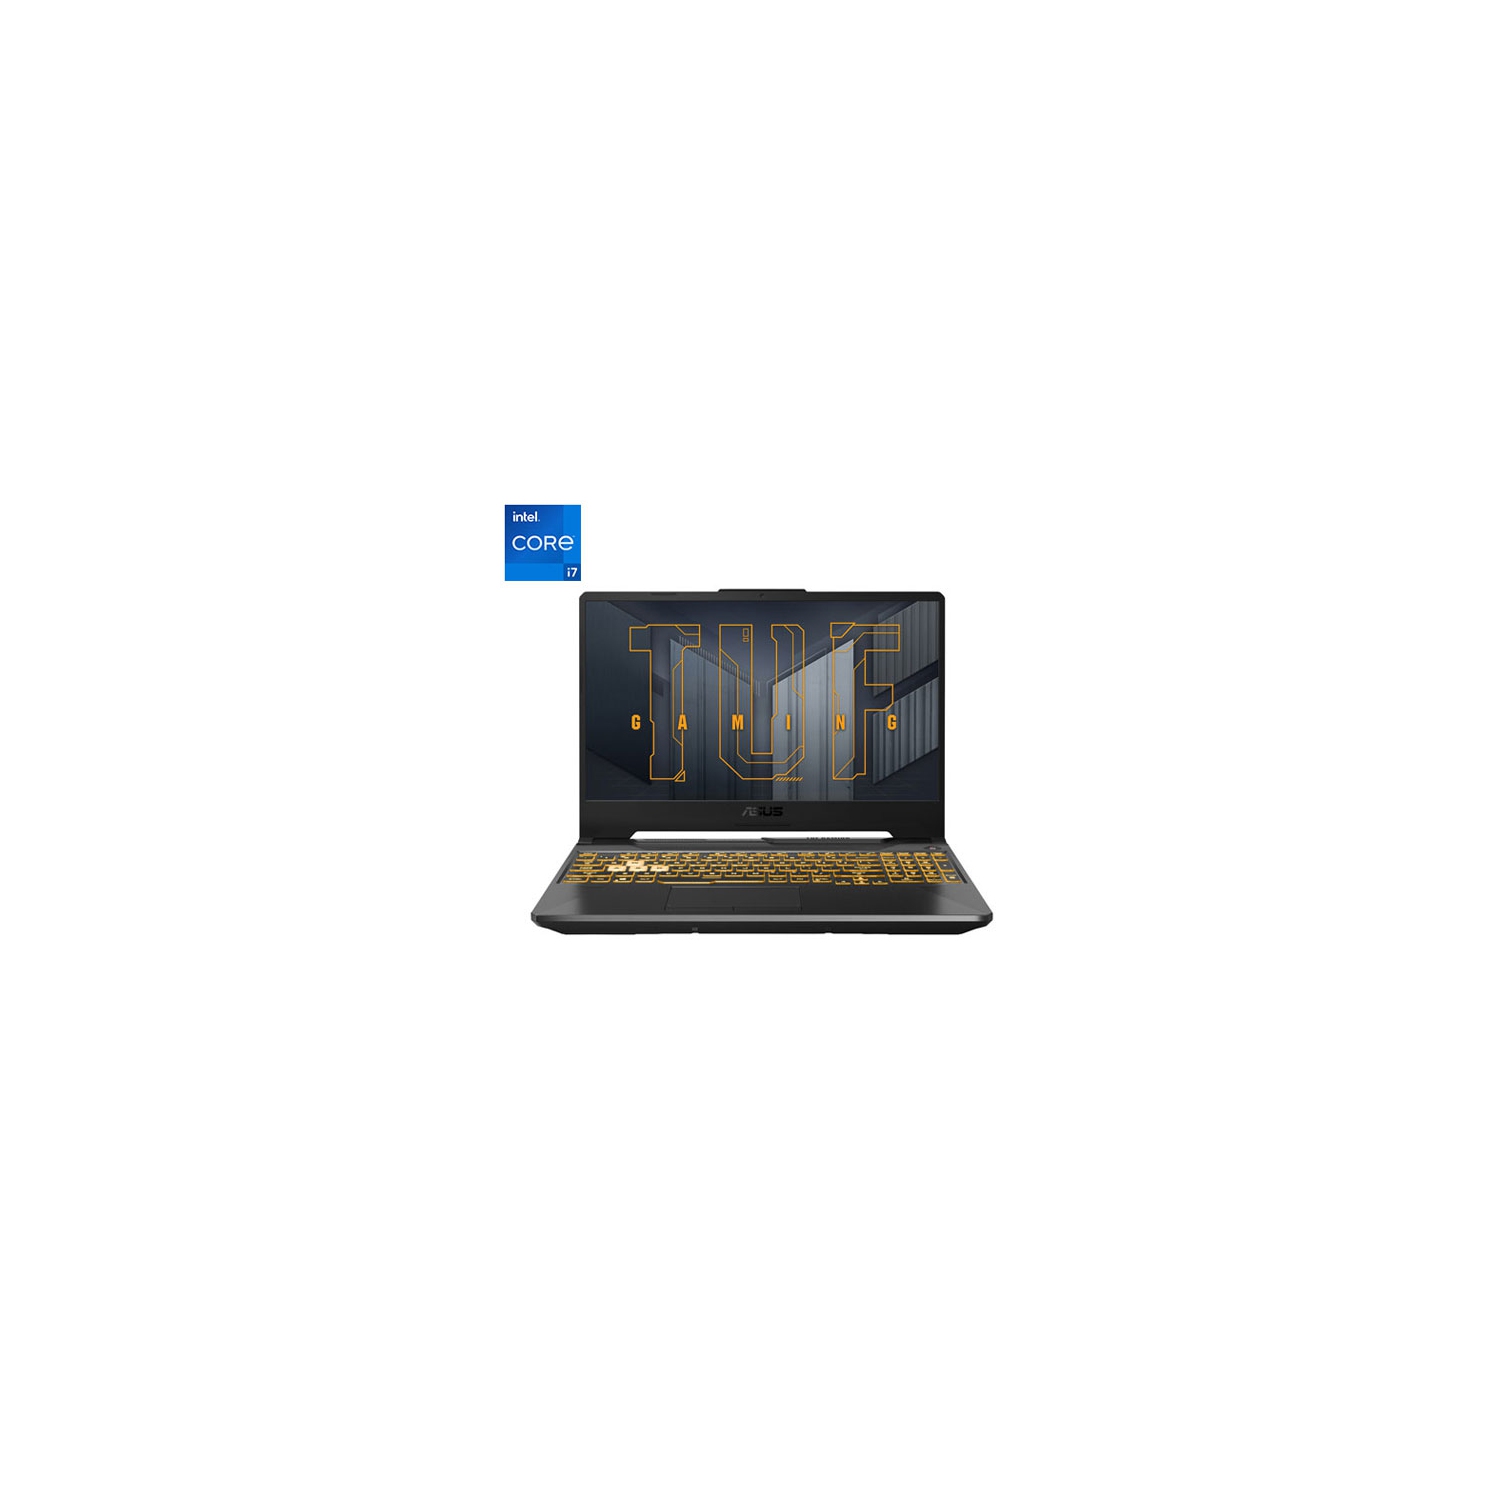 Refurbished (Excellent) - ASUS TUF F15 15.6" Gaming Laptop - Grey (Intel Core i7-11800H/512GB SSD/16GB RAM/RTX 3060/Win10)